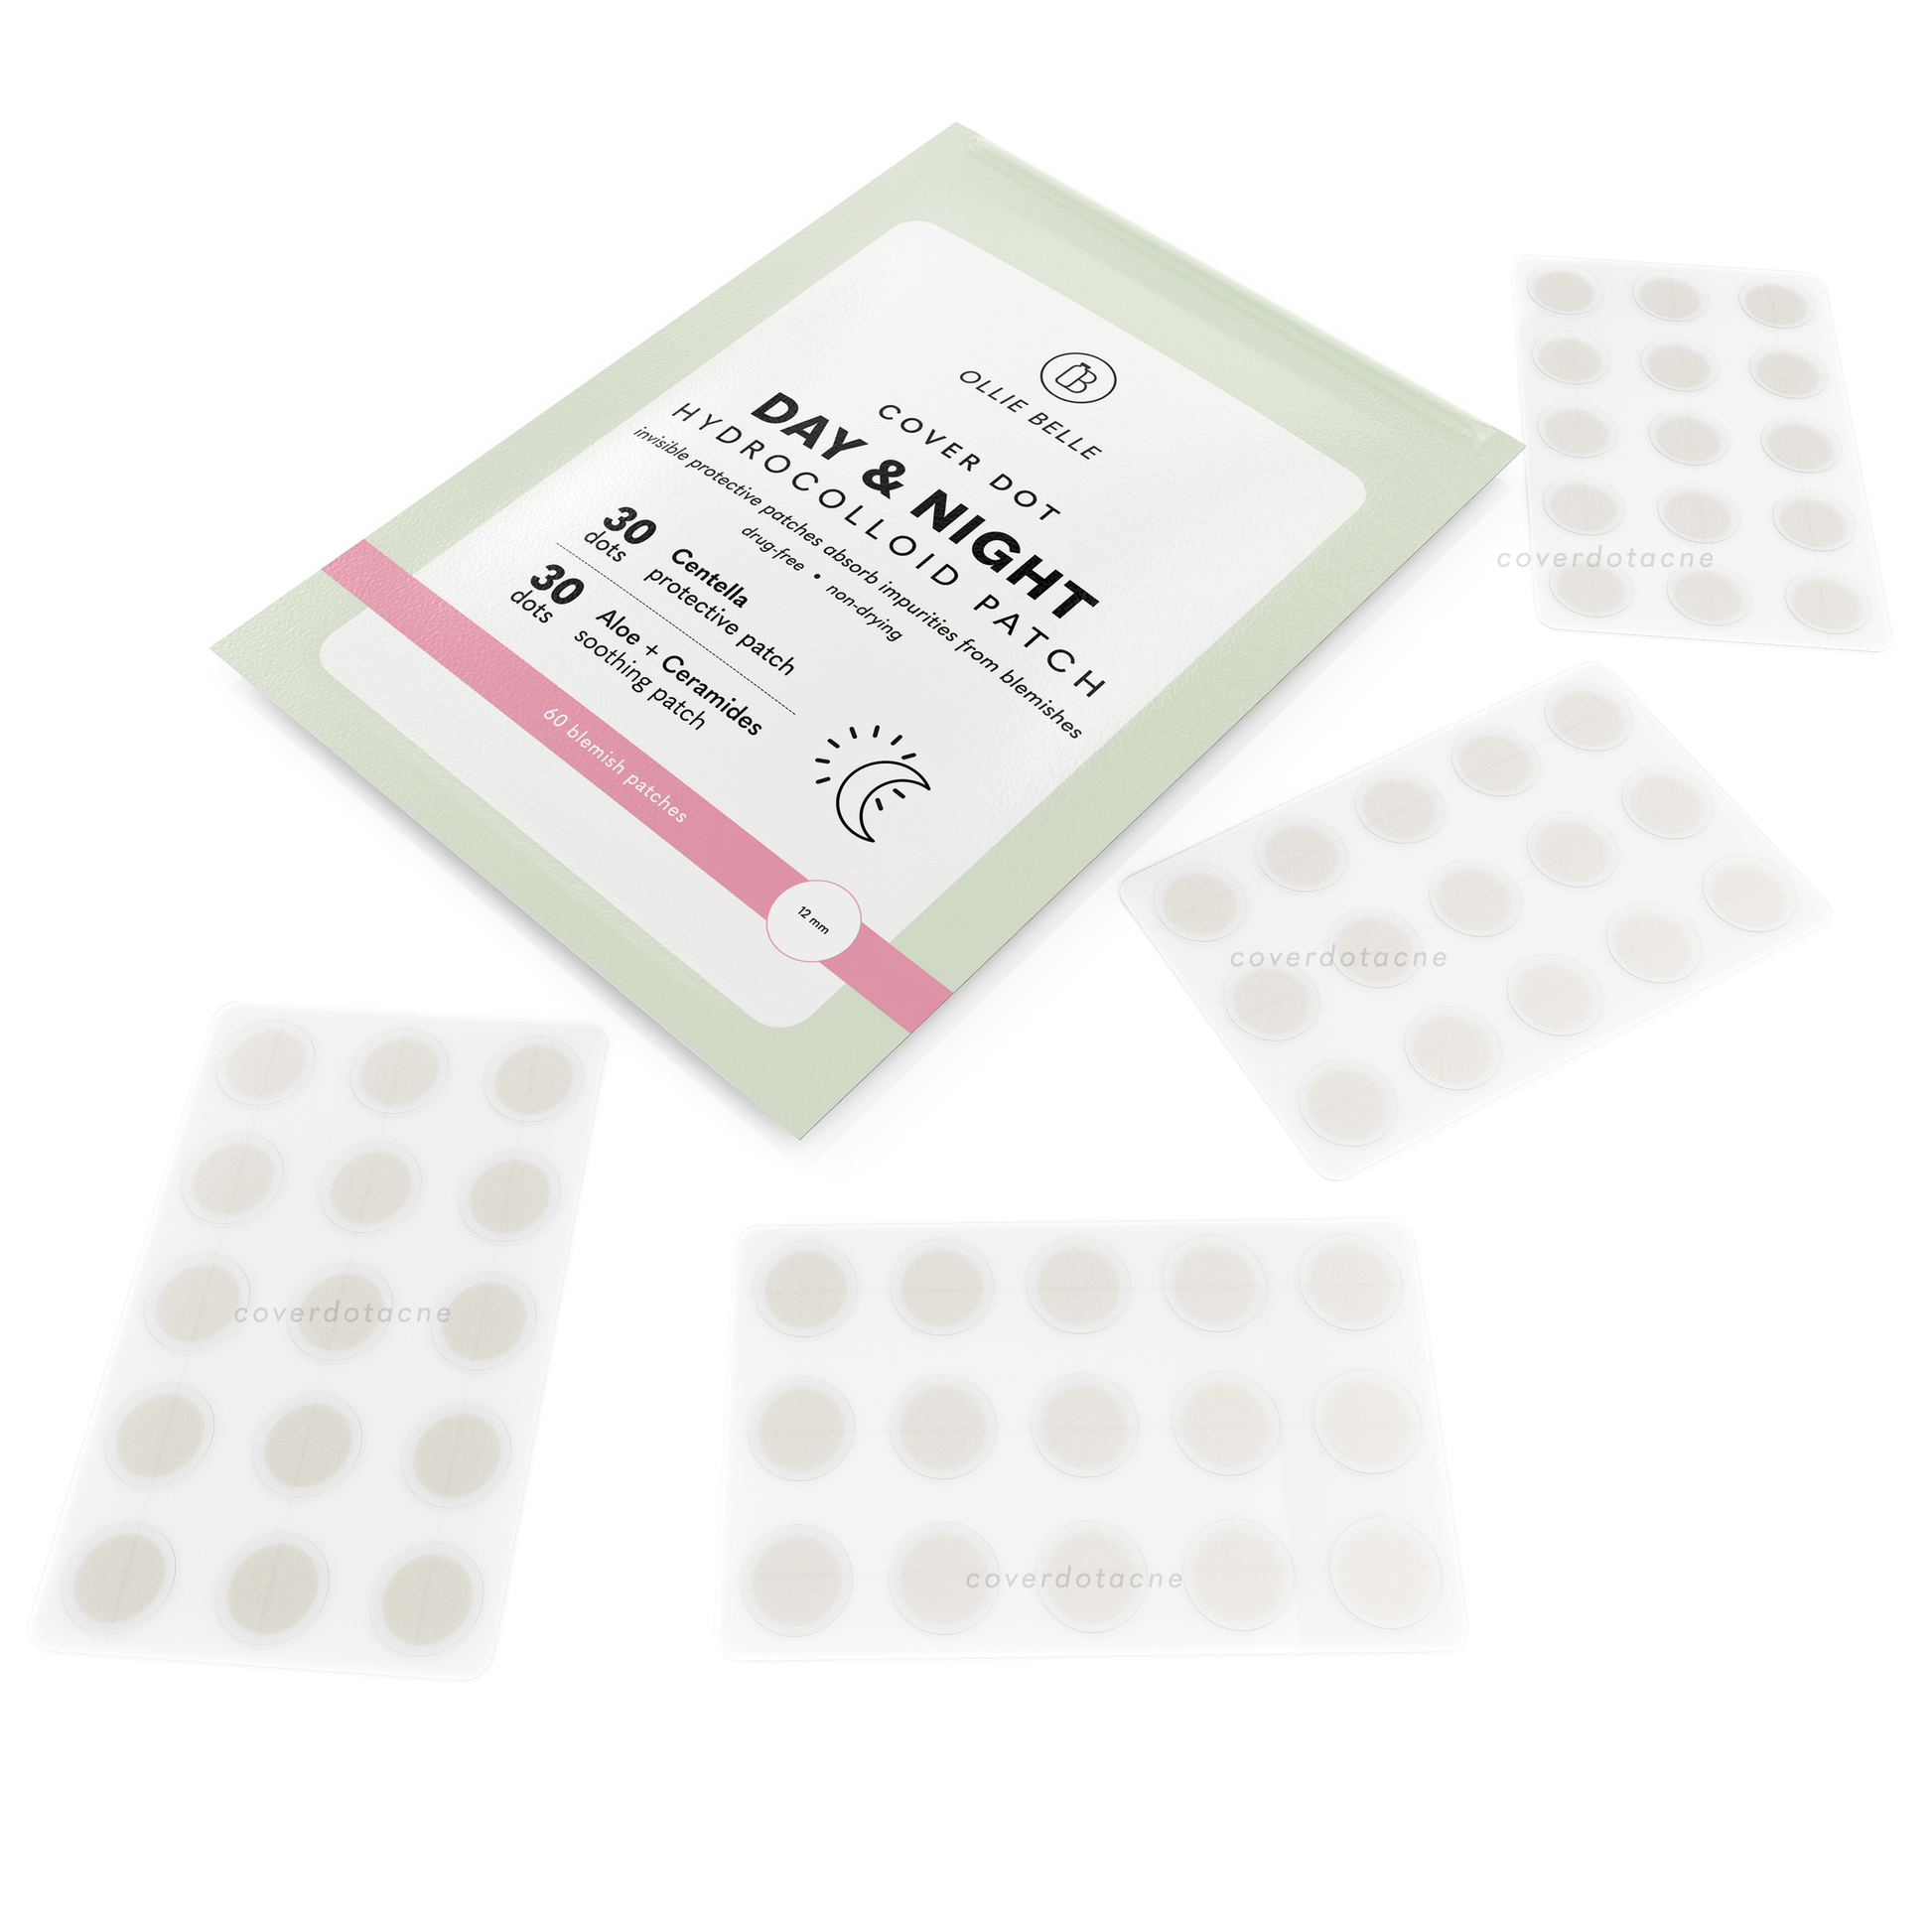 Acne Patches Cover Dot Day & Night Hydrocolloid Patch with Aloe & Centella 60 Patches